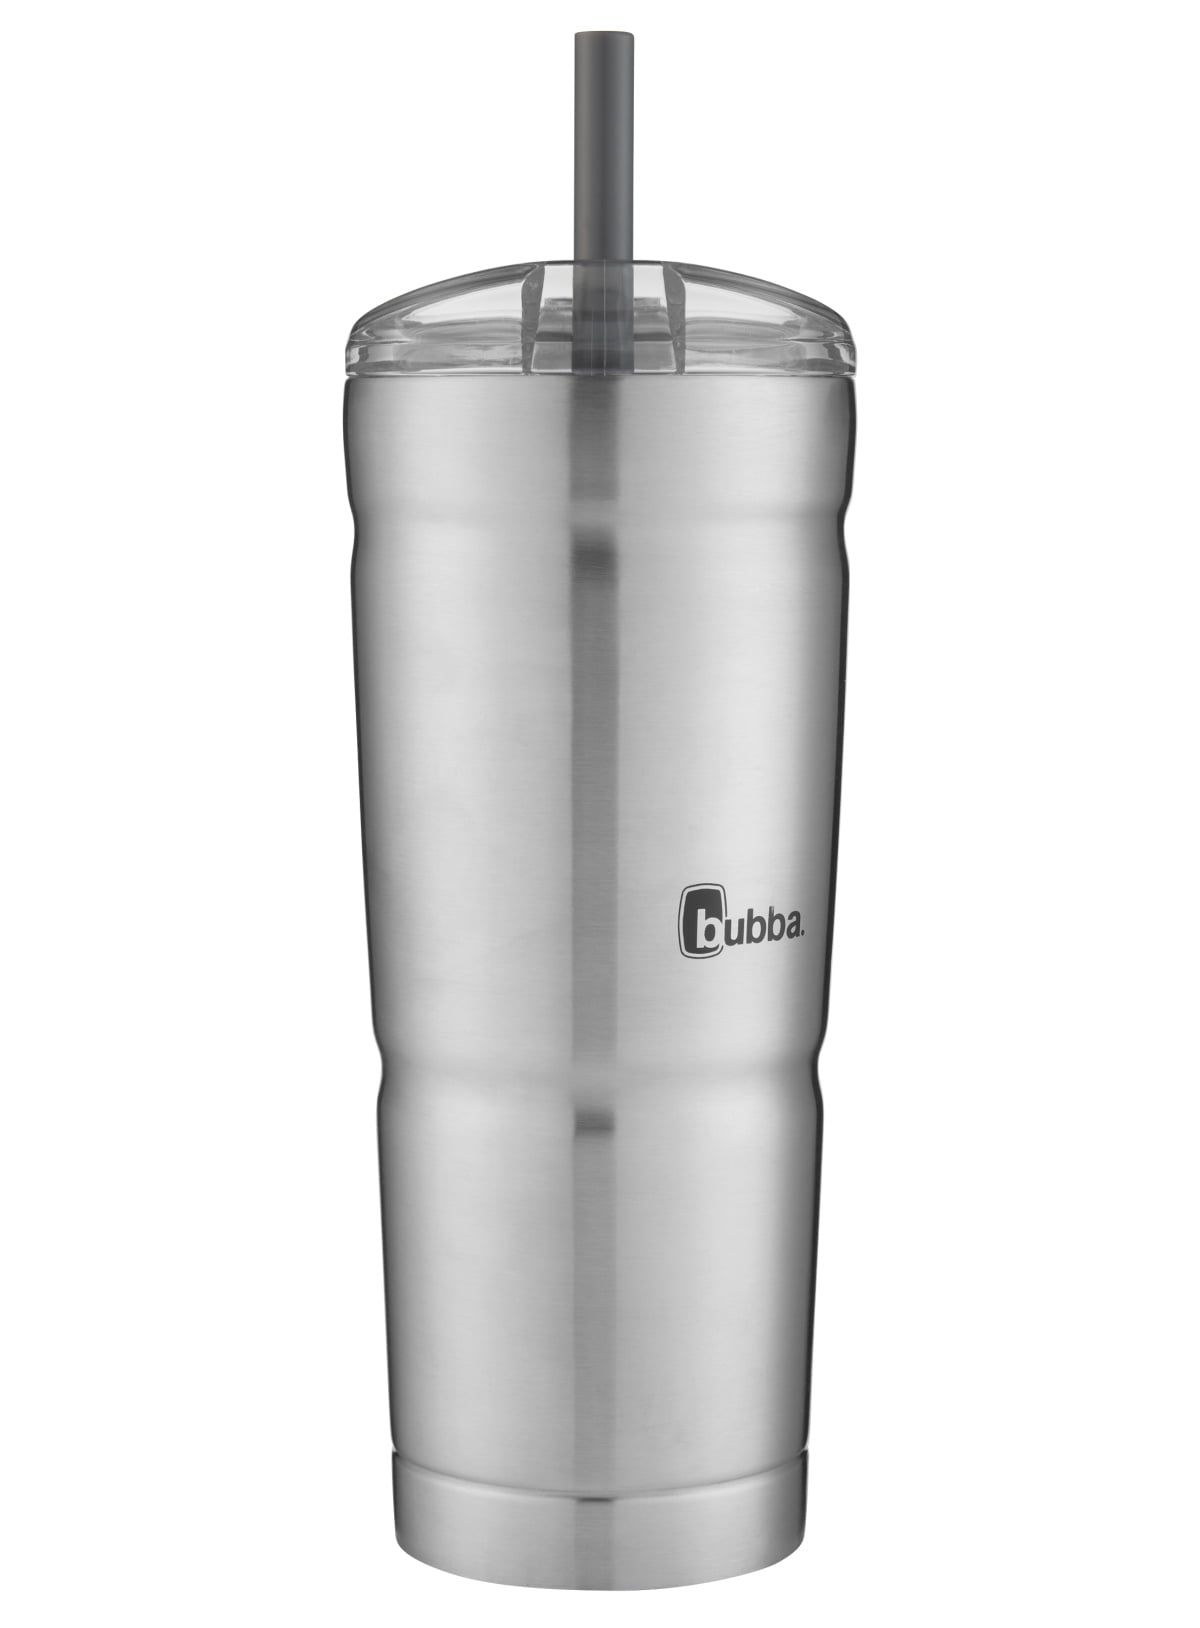 Bubba Brands Vacuum-Insulated Stainless Steel Tumbler with Lid, Straw,  Removable Bumper and Handle, …See more Bubba Brands Vacuum-Insulated  Stainless